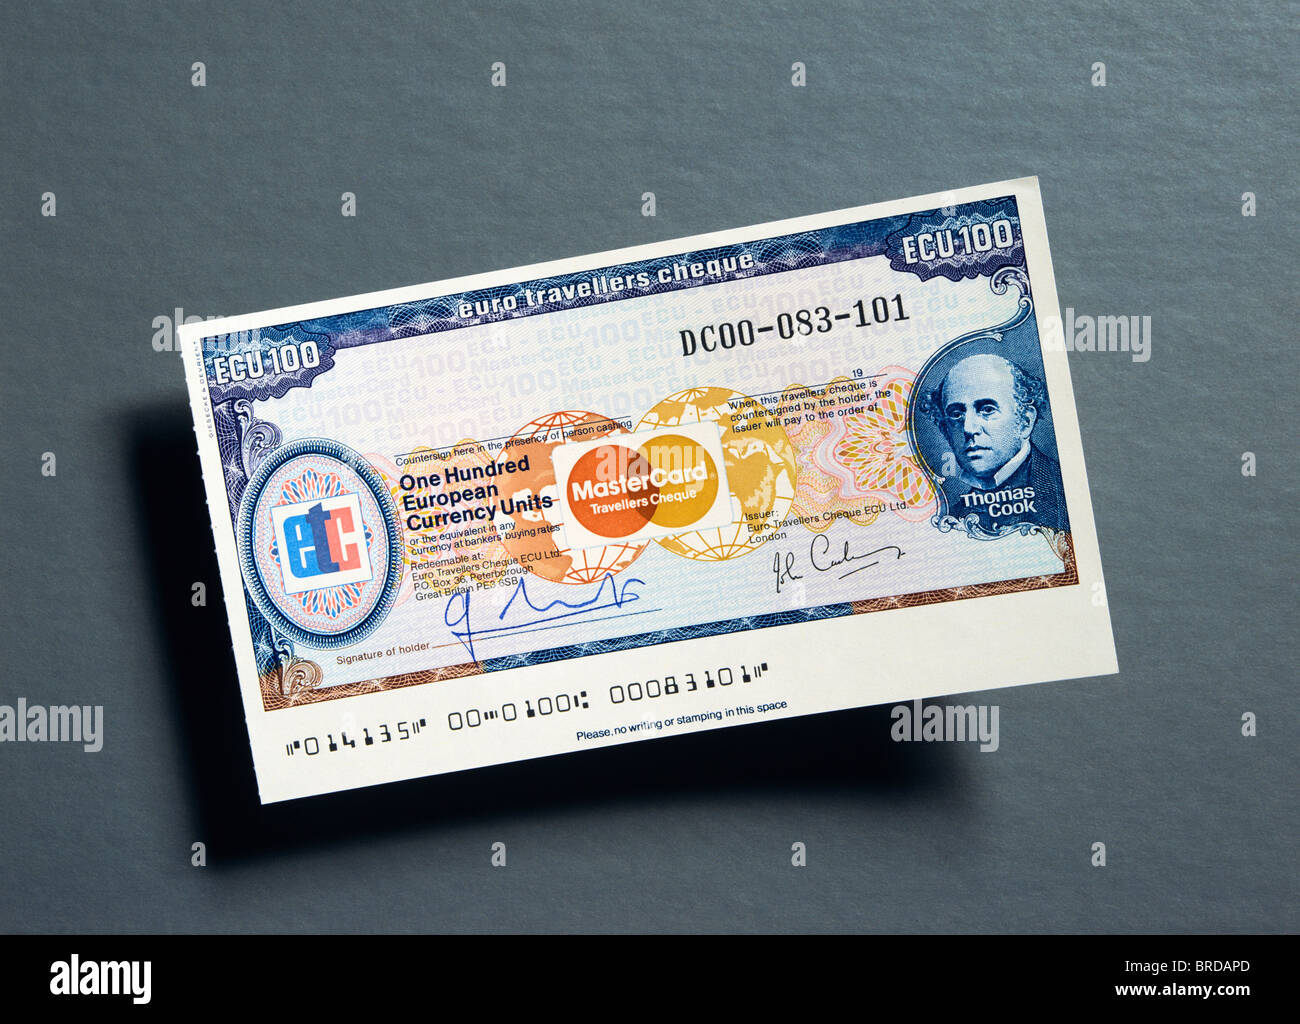 Former 100 Ecu - European Currency Unit - travellers cheque - Thomas Cook effigy printed in corner Stock Photo